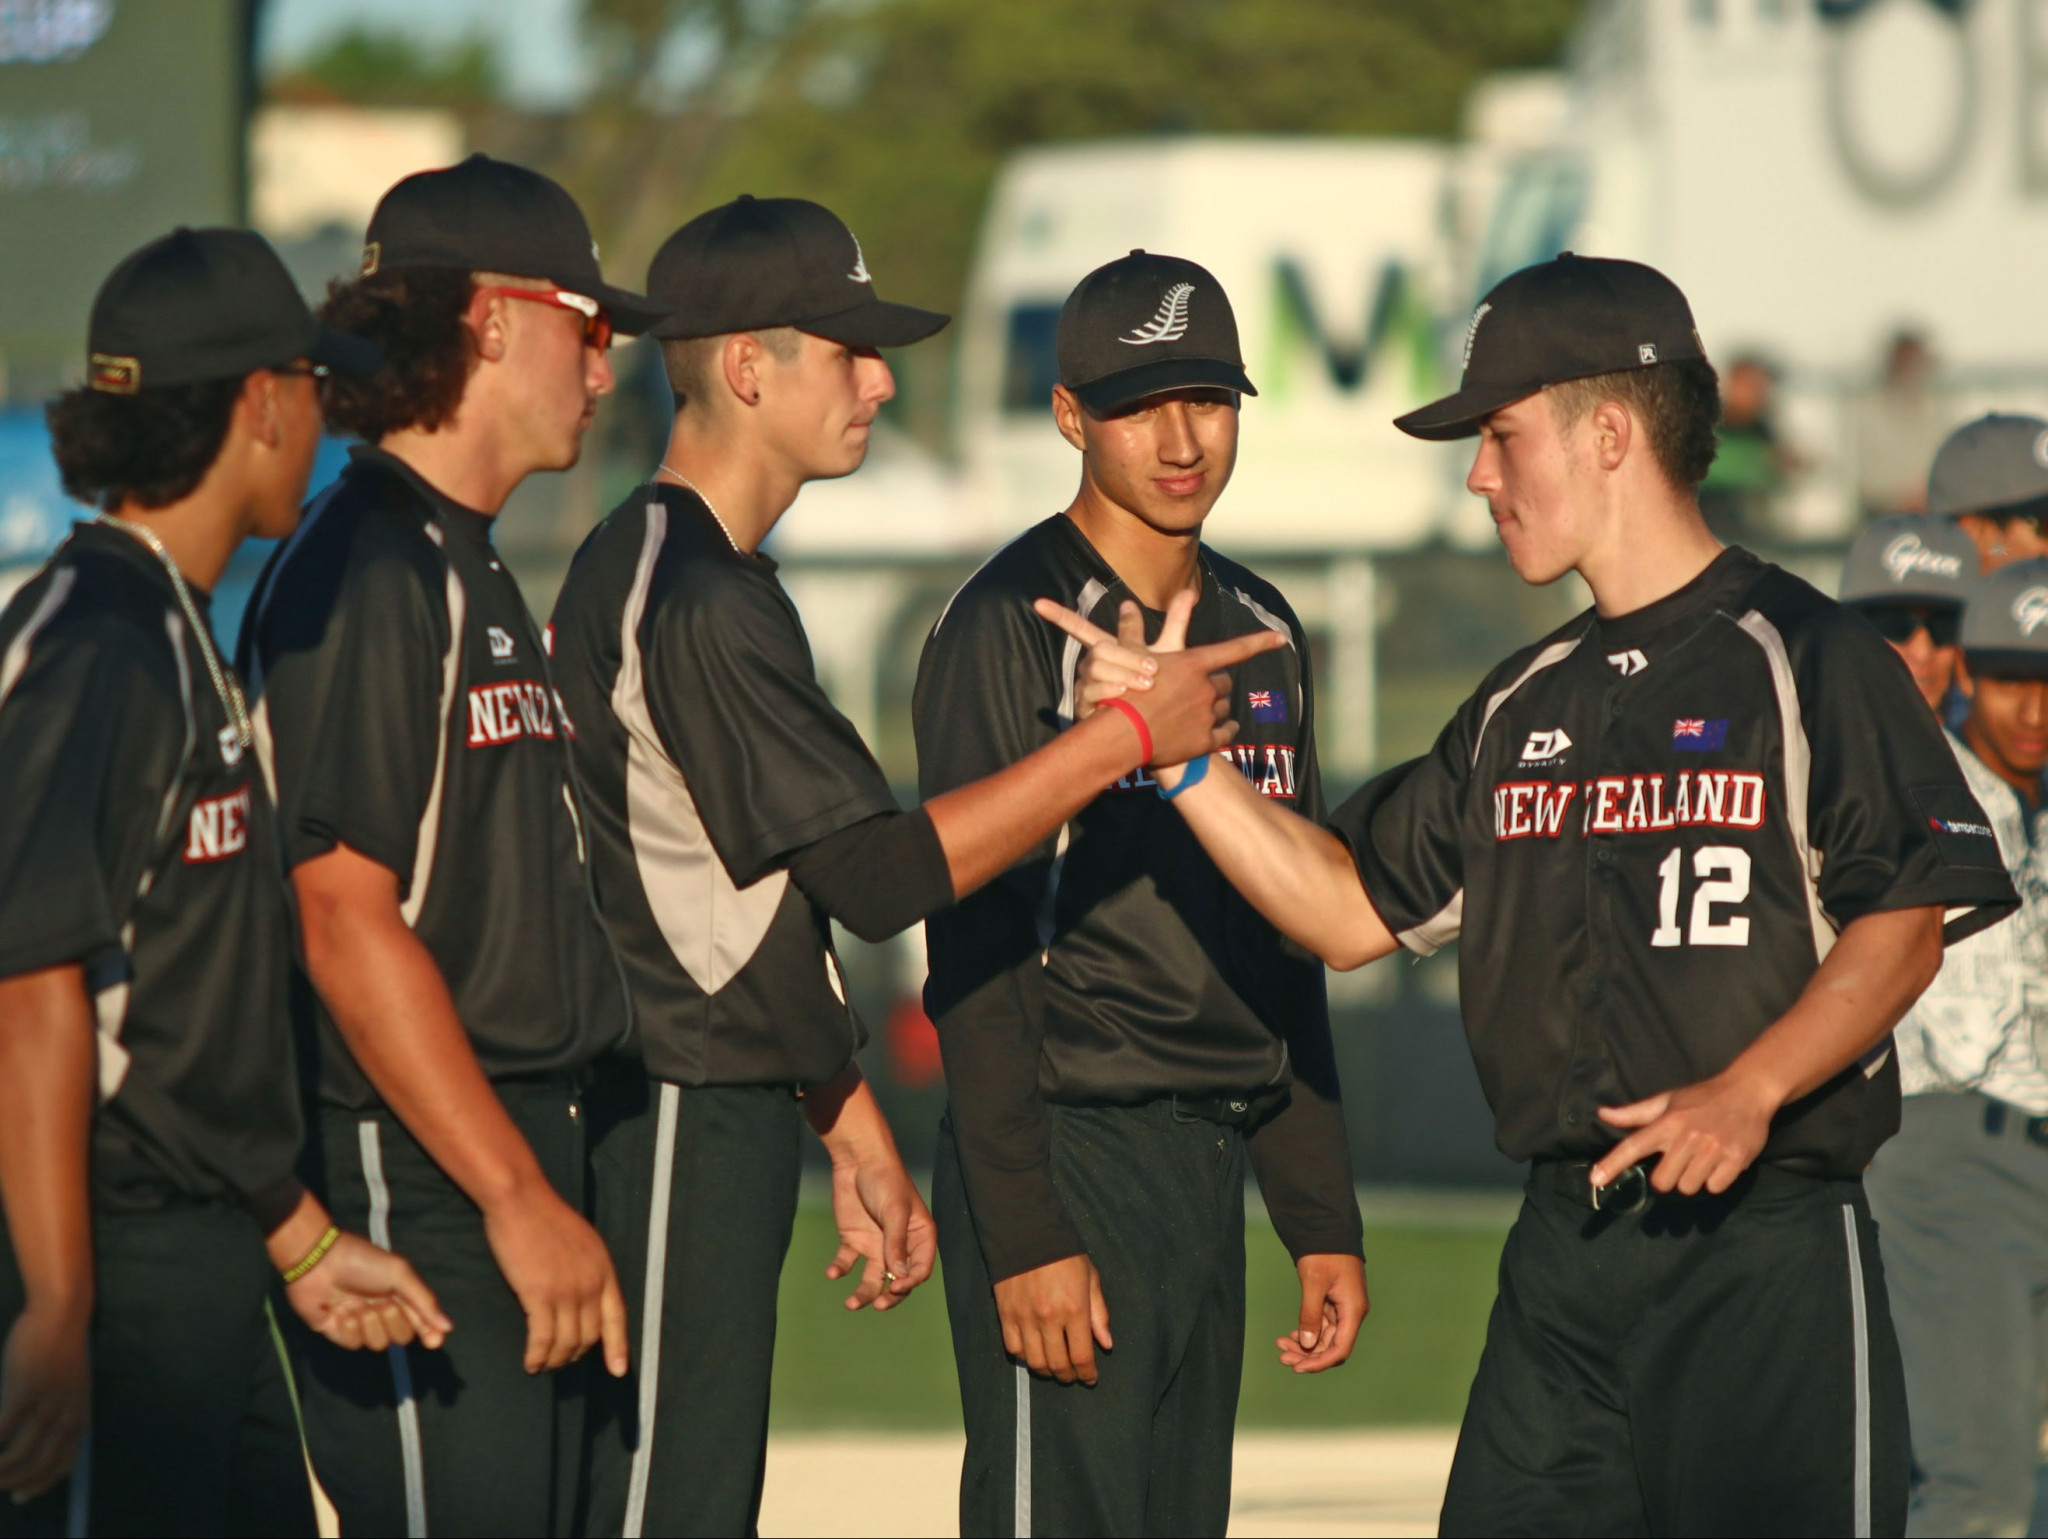 New Zealand came from behind to beat Guatemala, and have booked a super round place ©WBSC